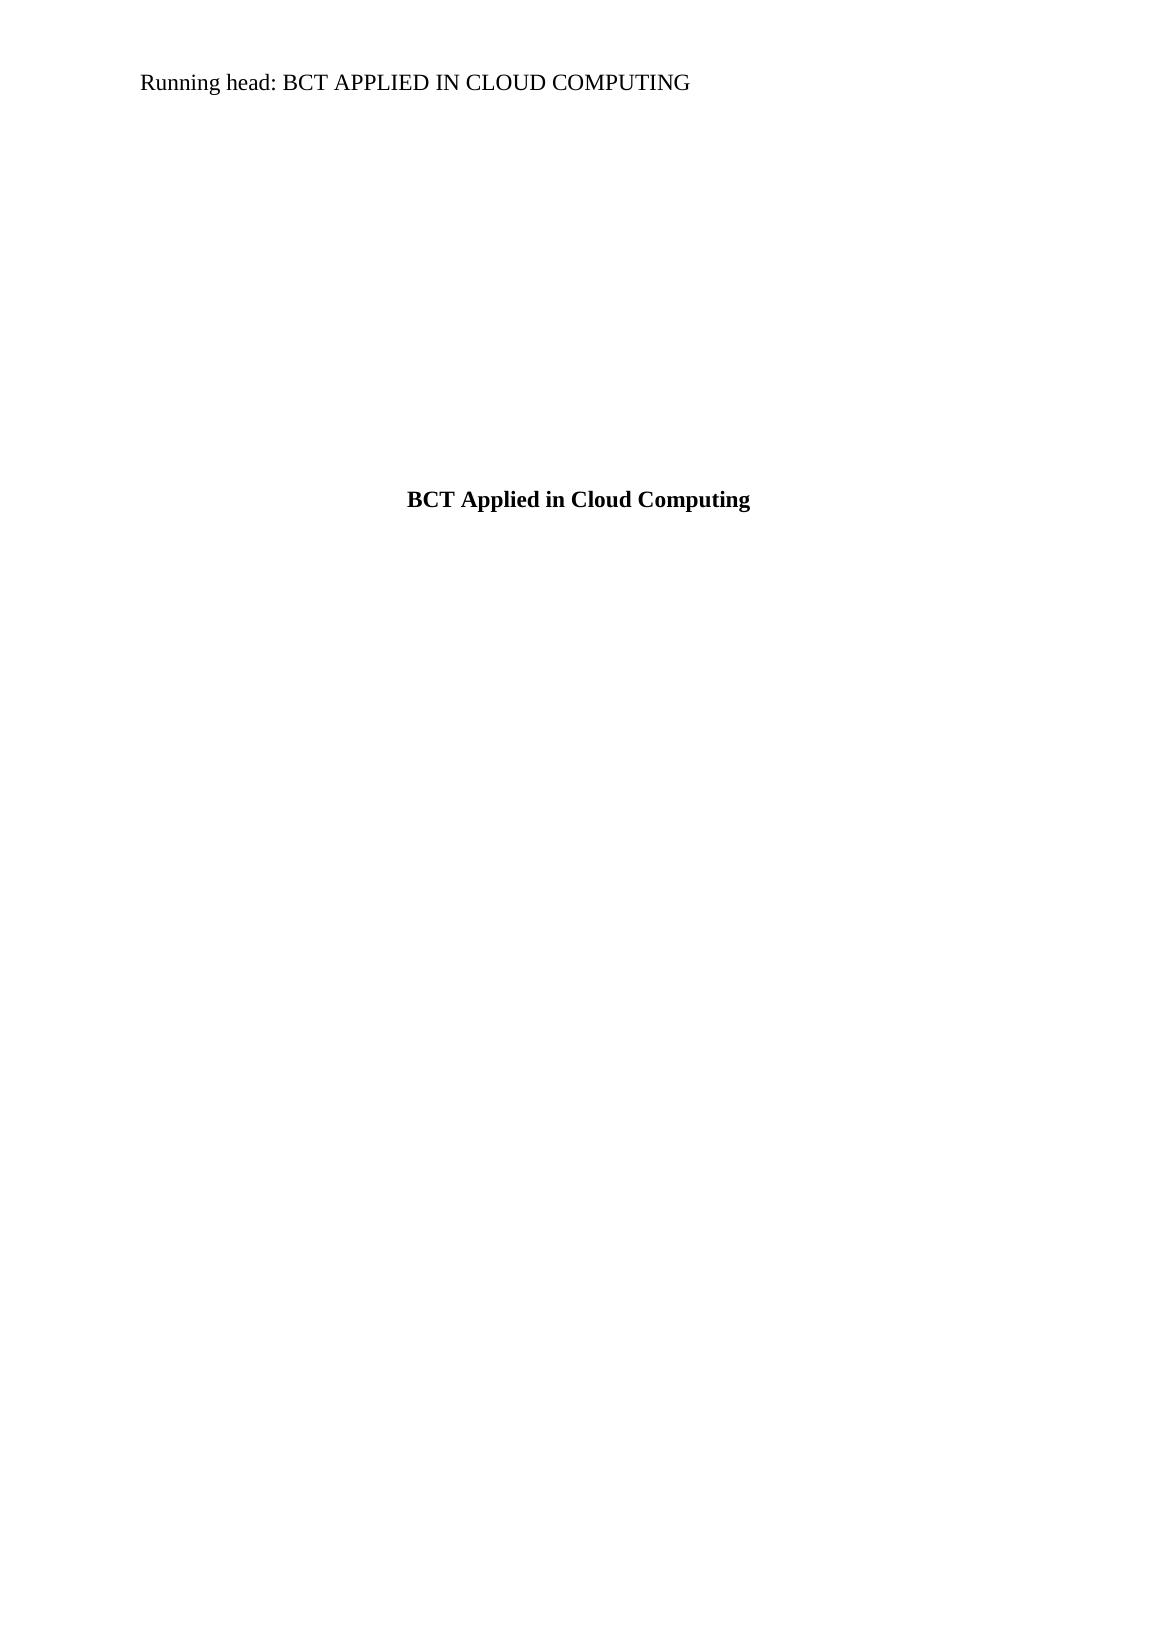 BCT APPLIED IN CLOUD COMPUTING_1